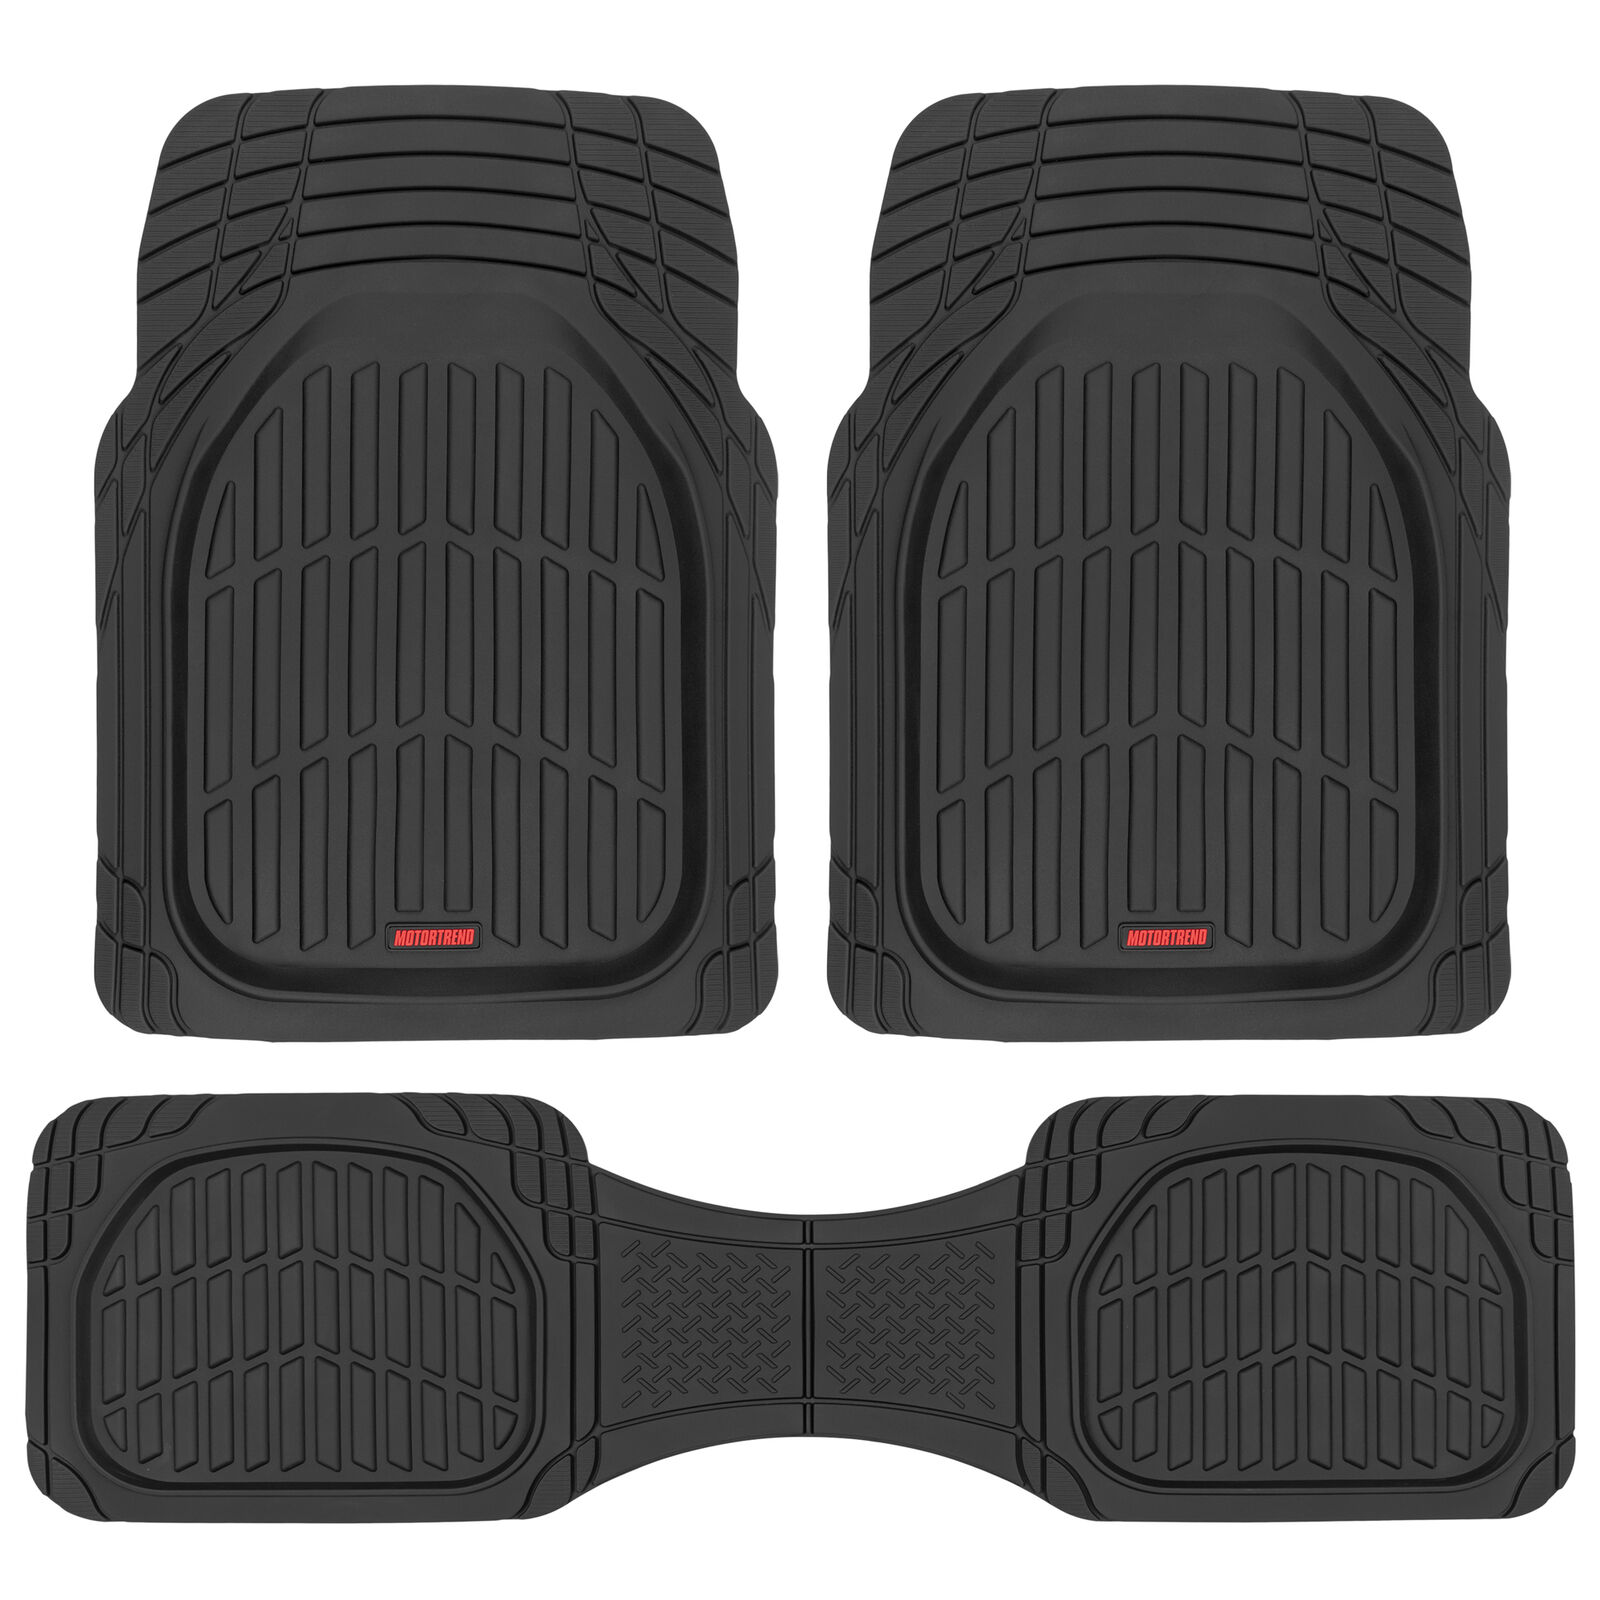 Deep Dish Heavy Duty Rubber Car Floor Mats 3pc Front Rear in Black All Weather